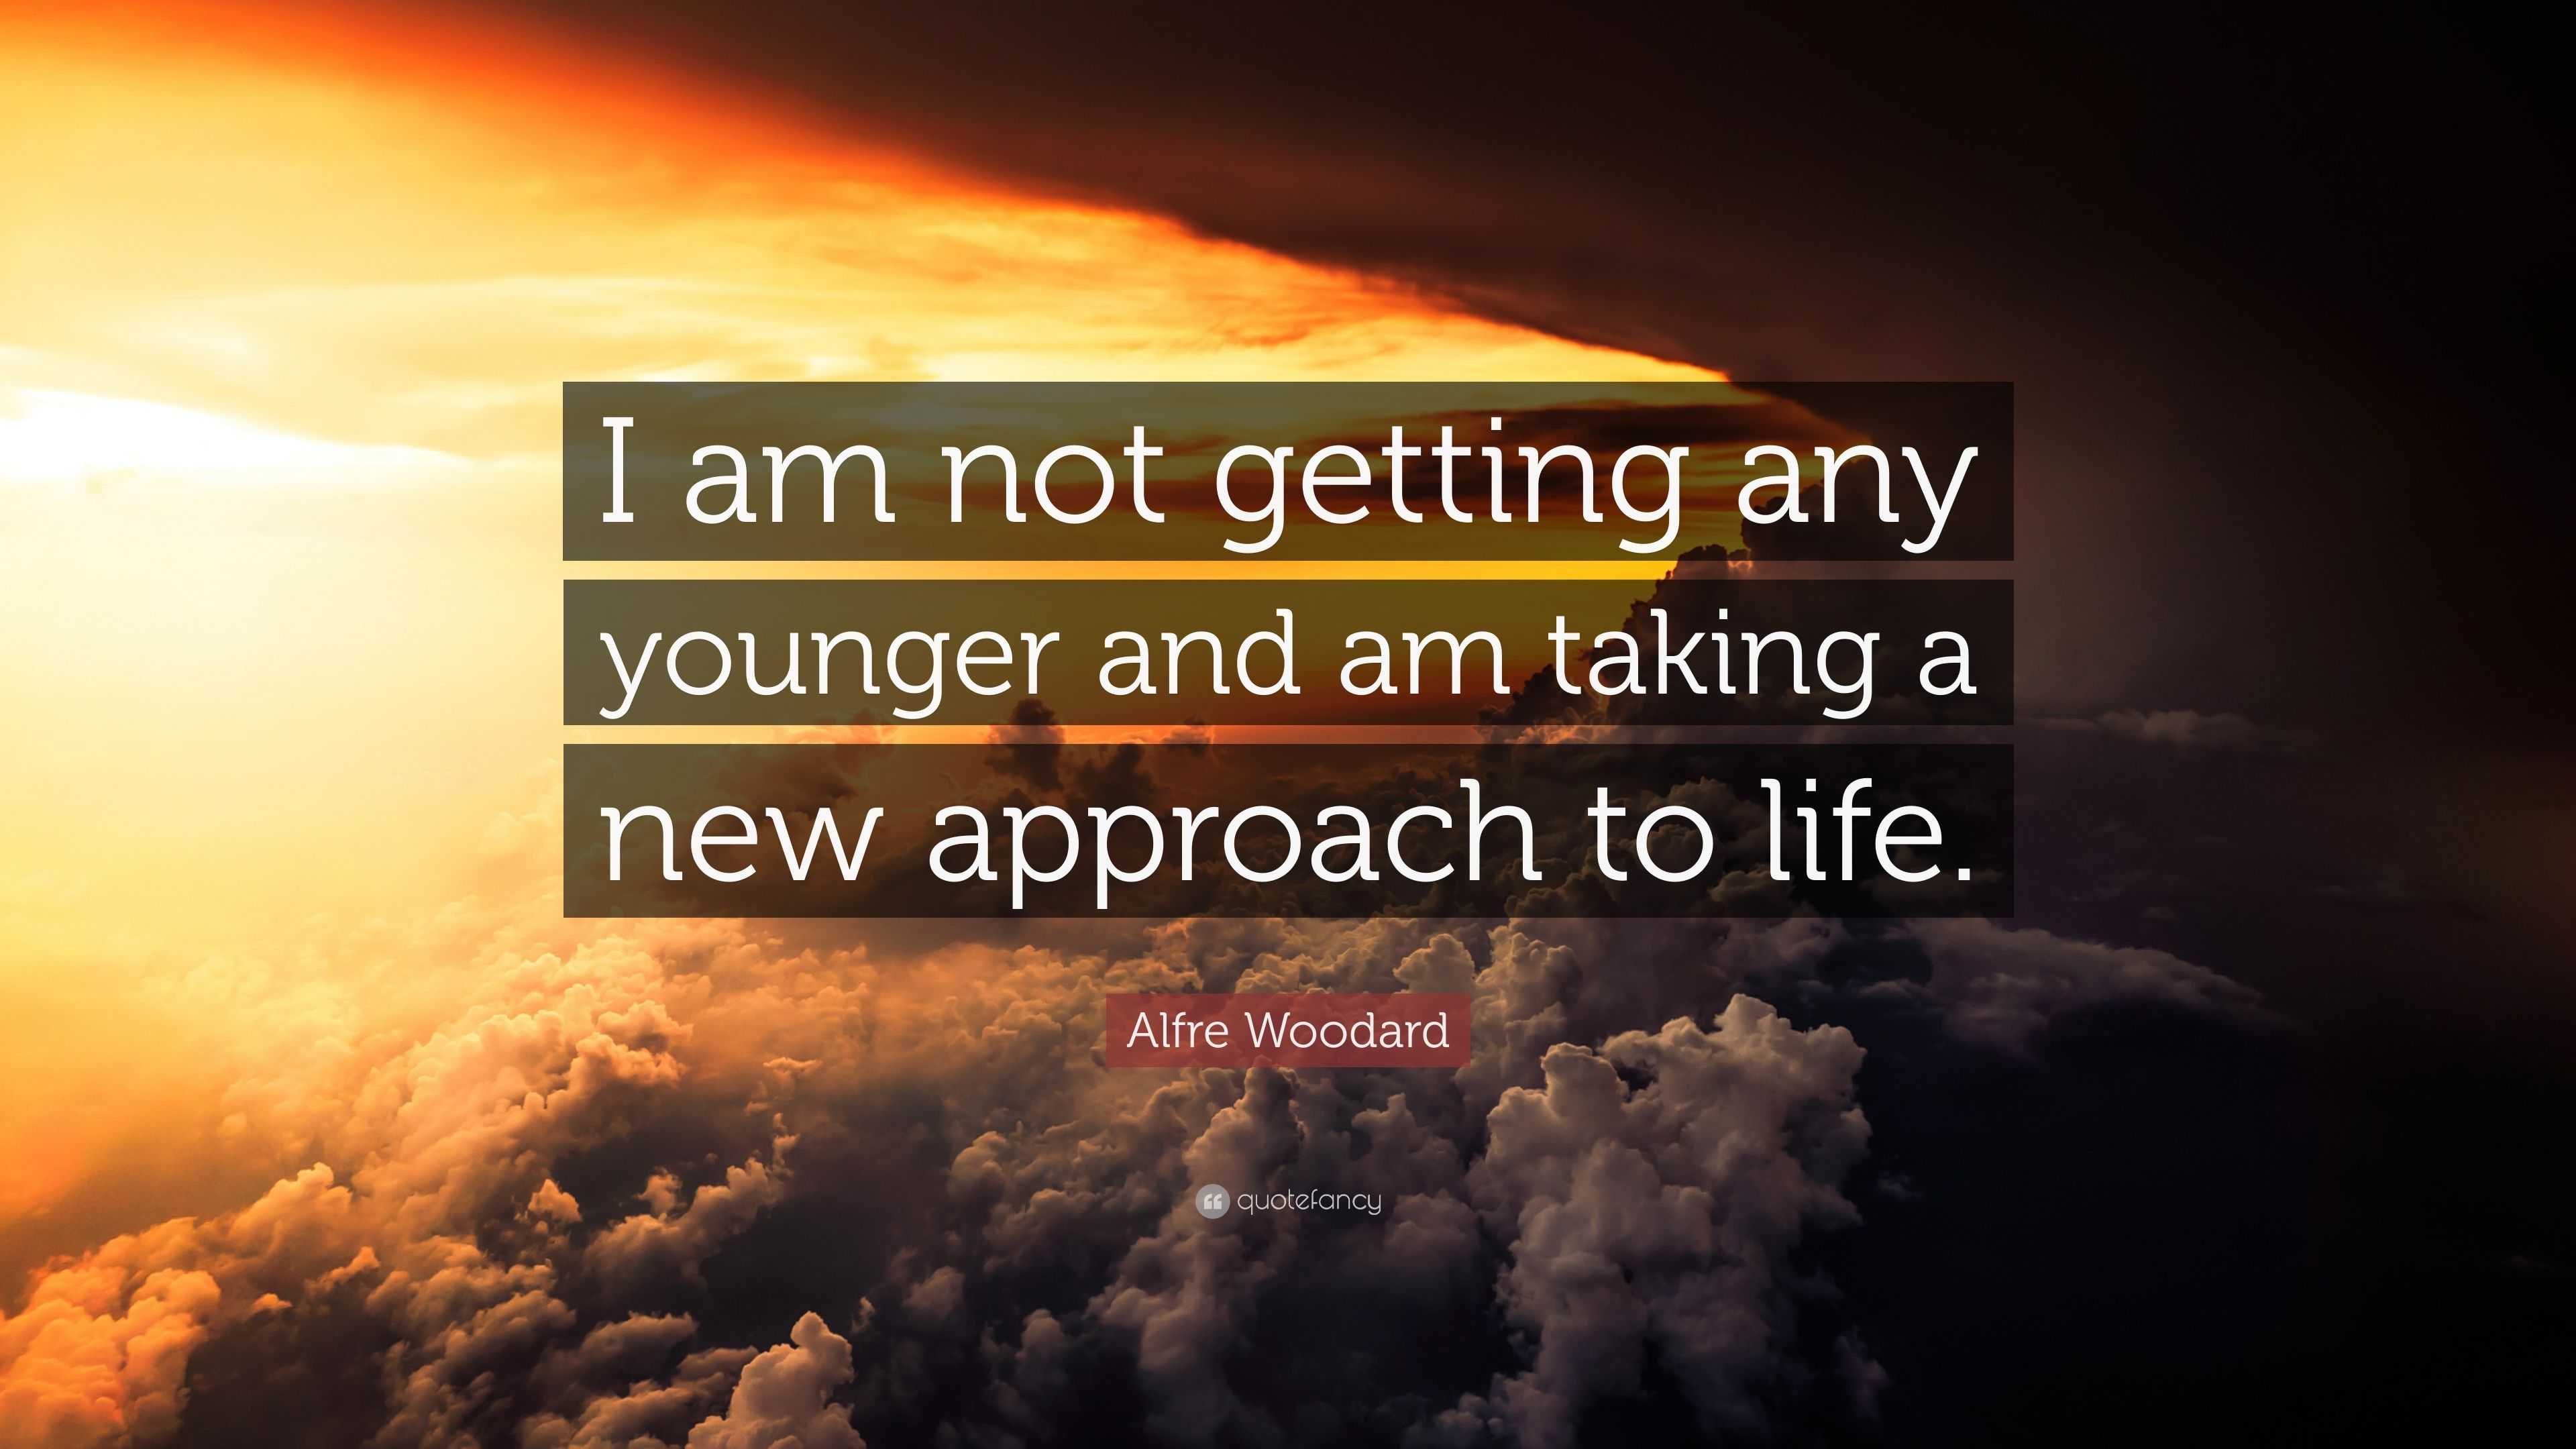 Alfre Woodard Quote: “I am not getting any younger and am taking a new ...